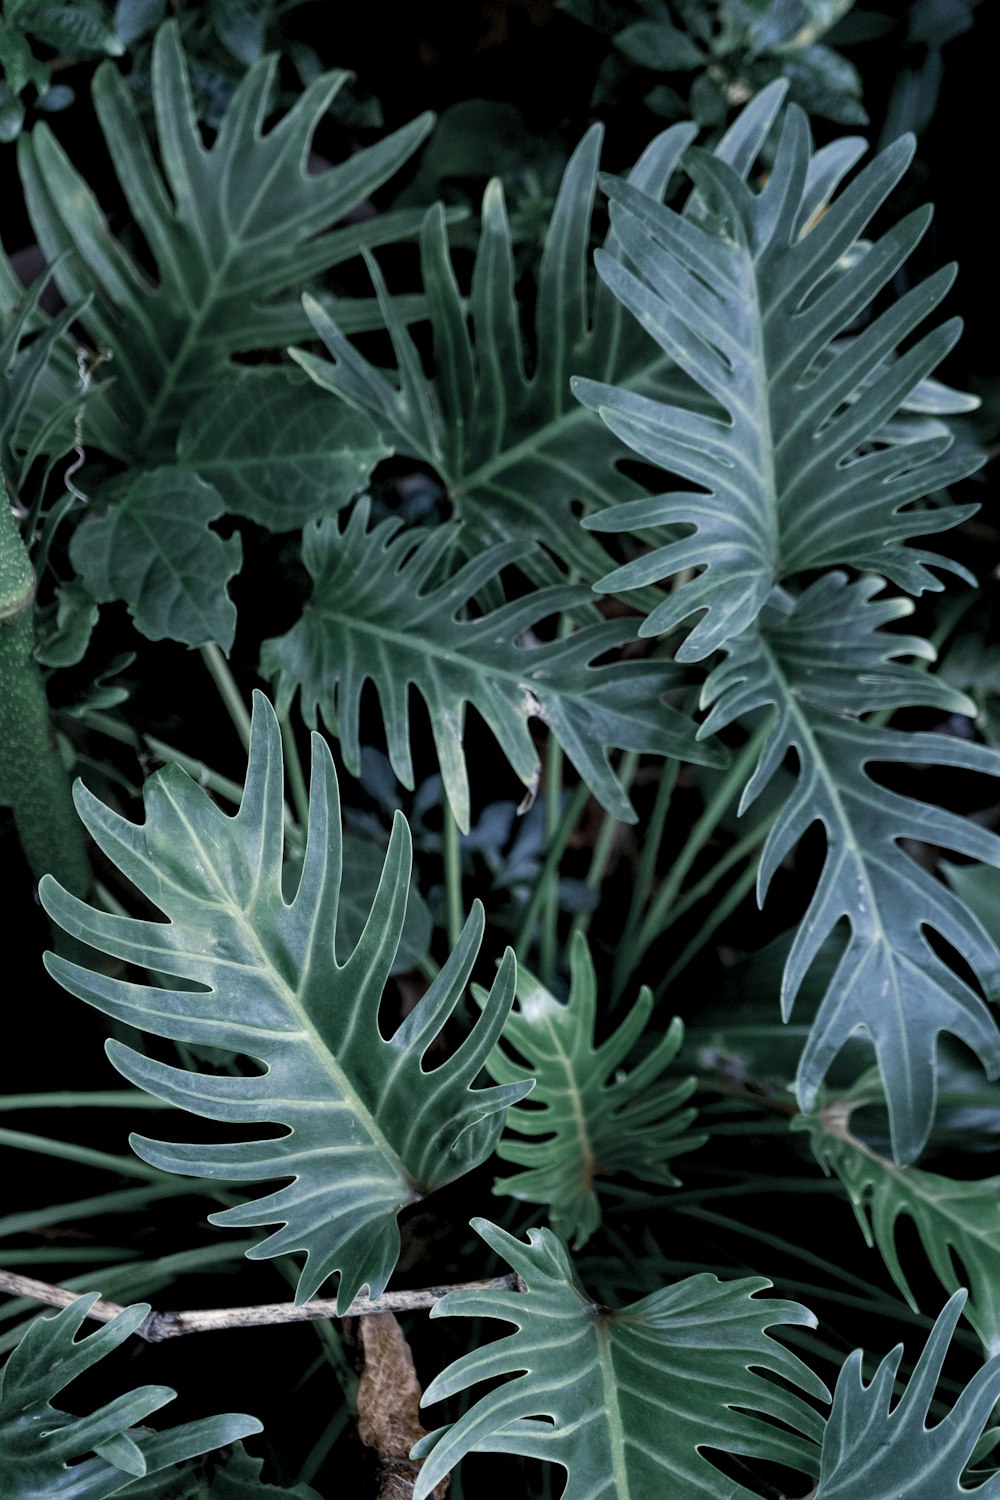 a close-up of some leaves